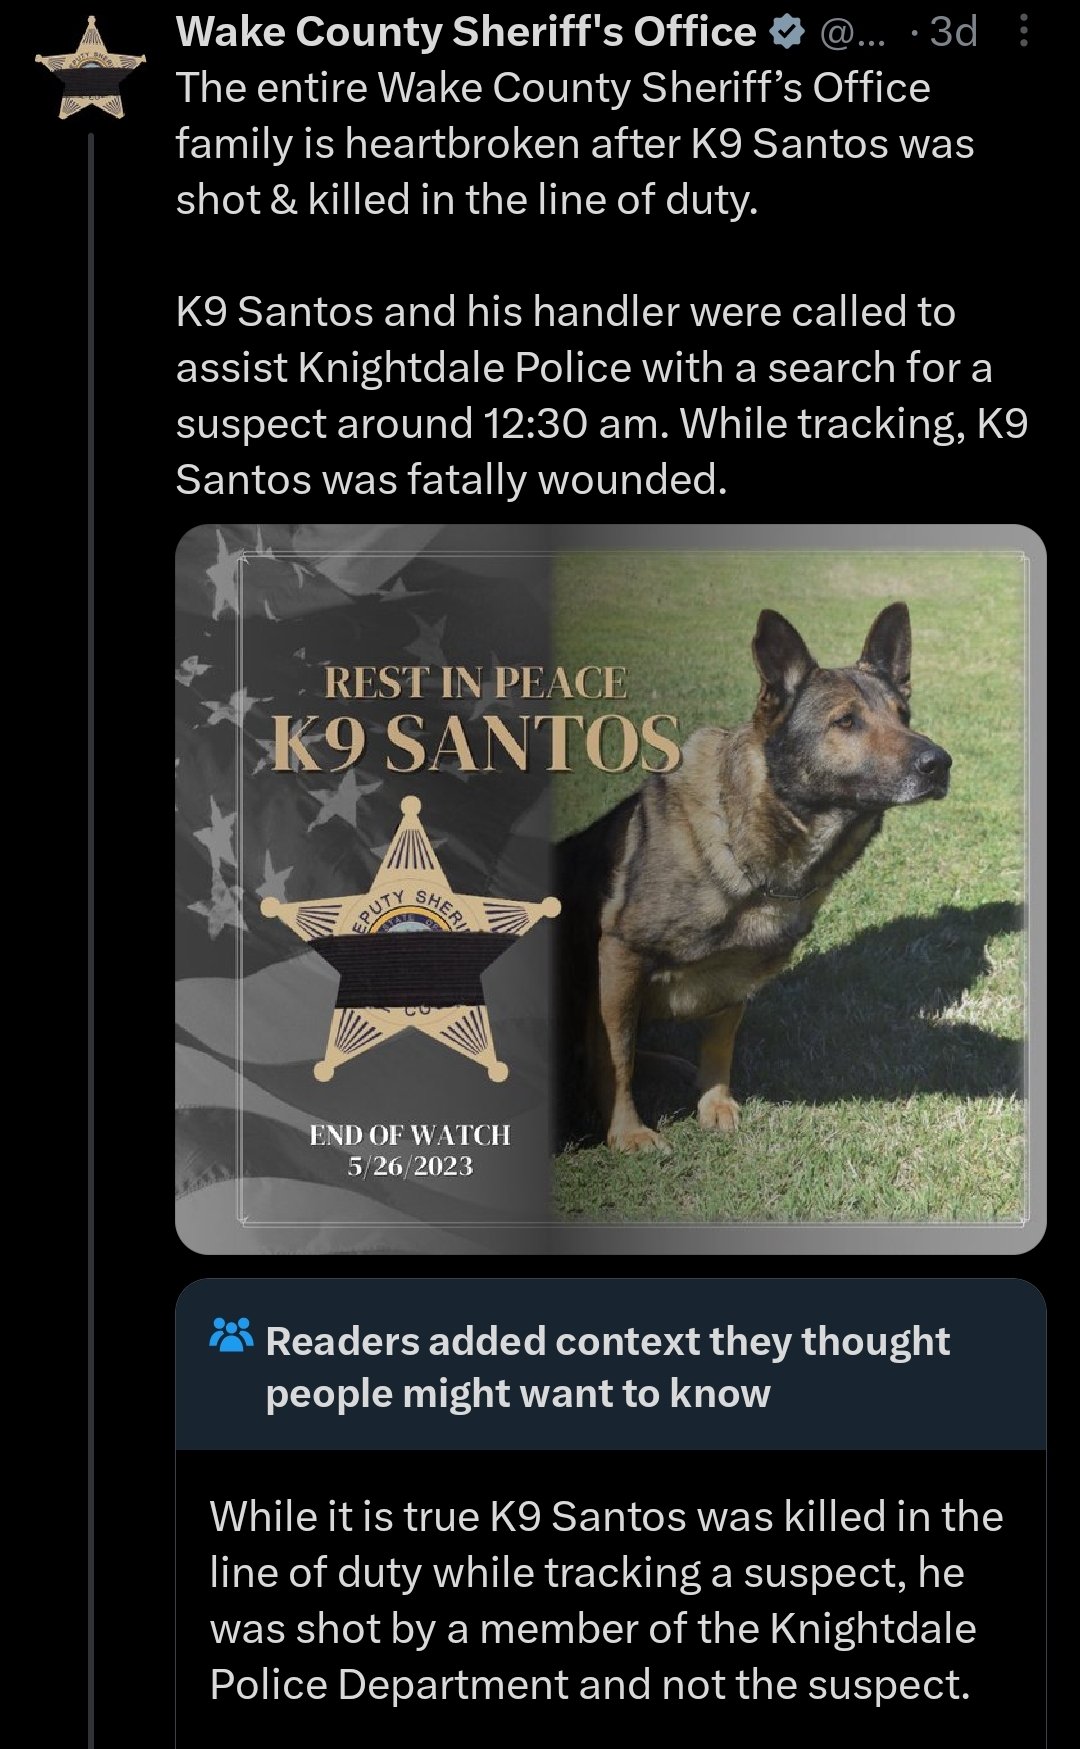 funny community notes - fauna - Wake County Sheriff's Office @... 3d The entire Wake County Sheriff's Office family is heartbroken after K9 Santos was shot & killed in the line of duty. K9 Santos and his handler were called to assist Knightdale Police wit